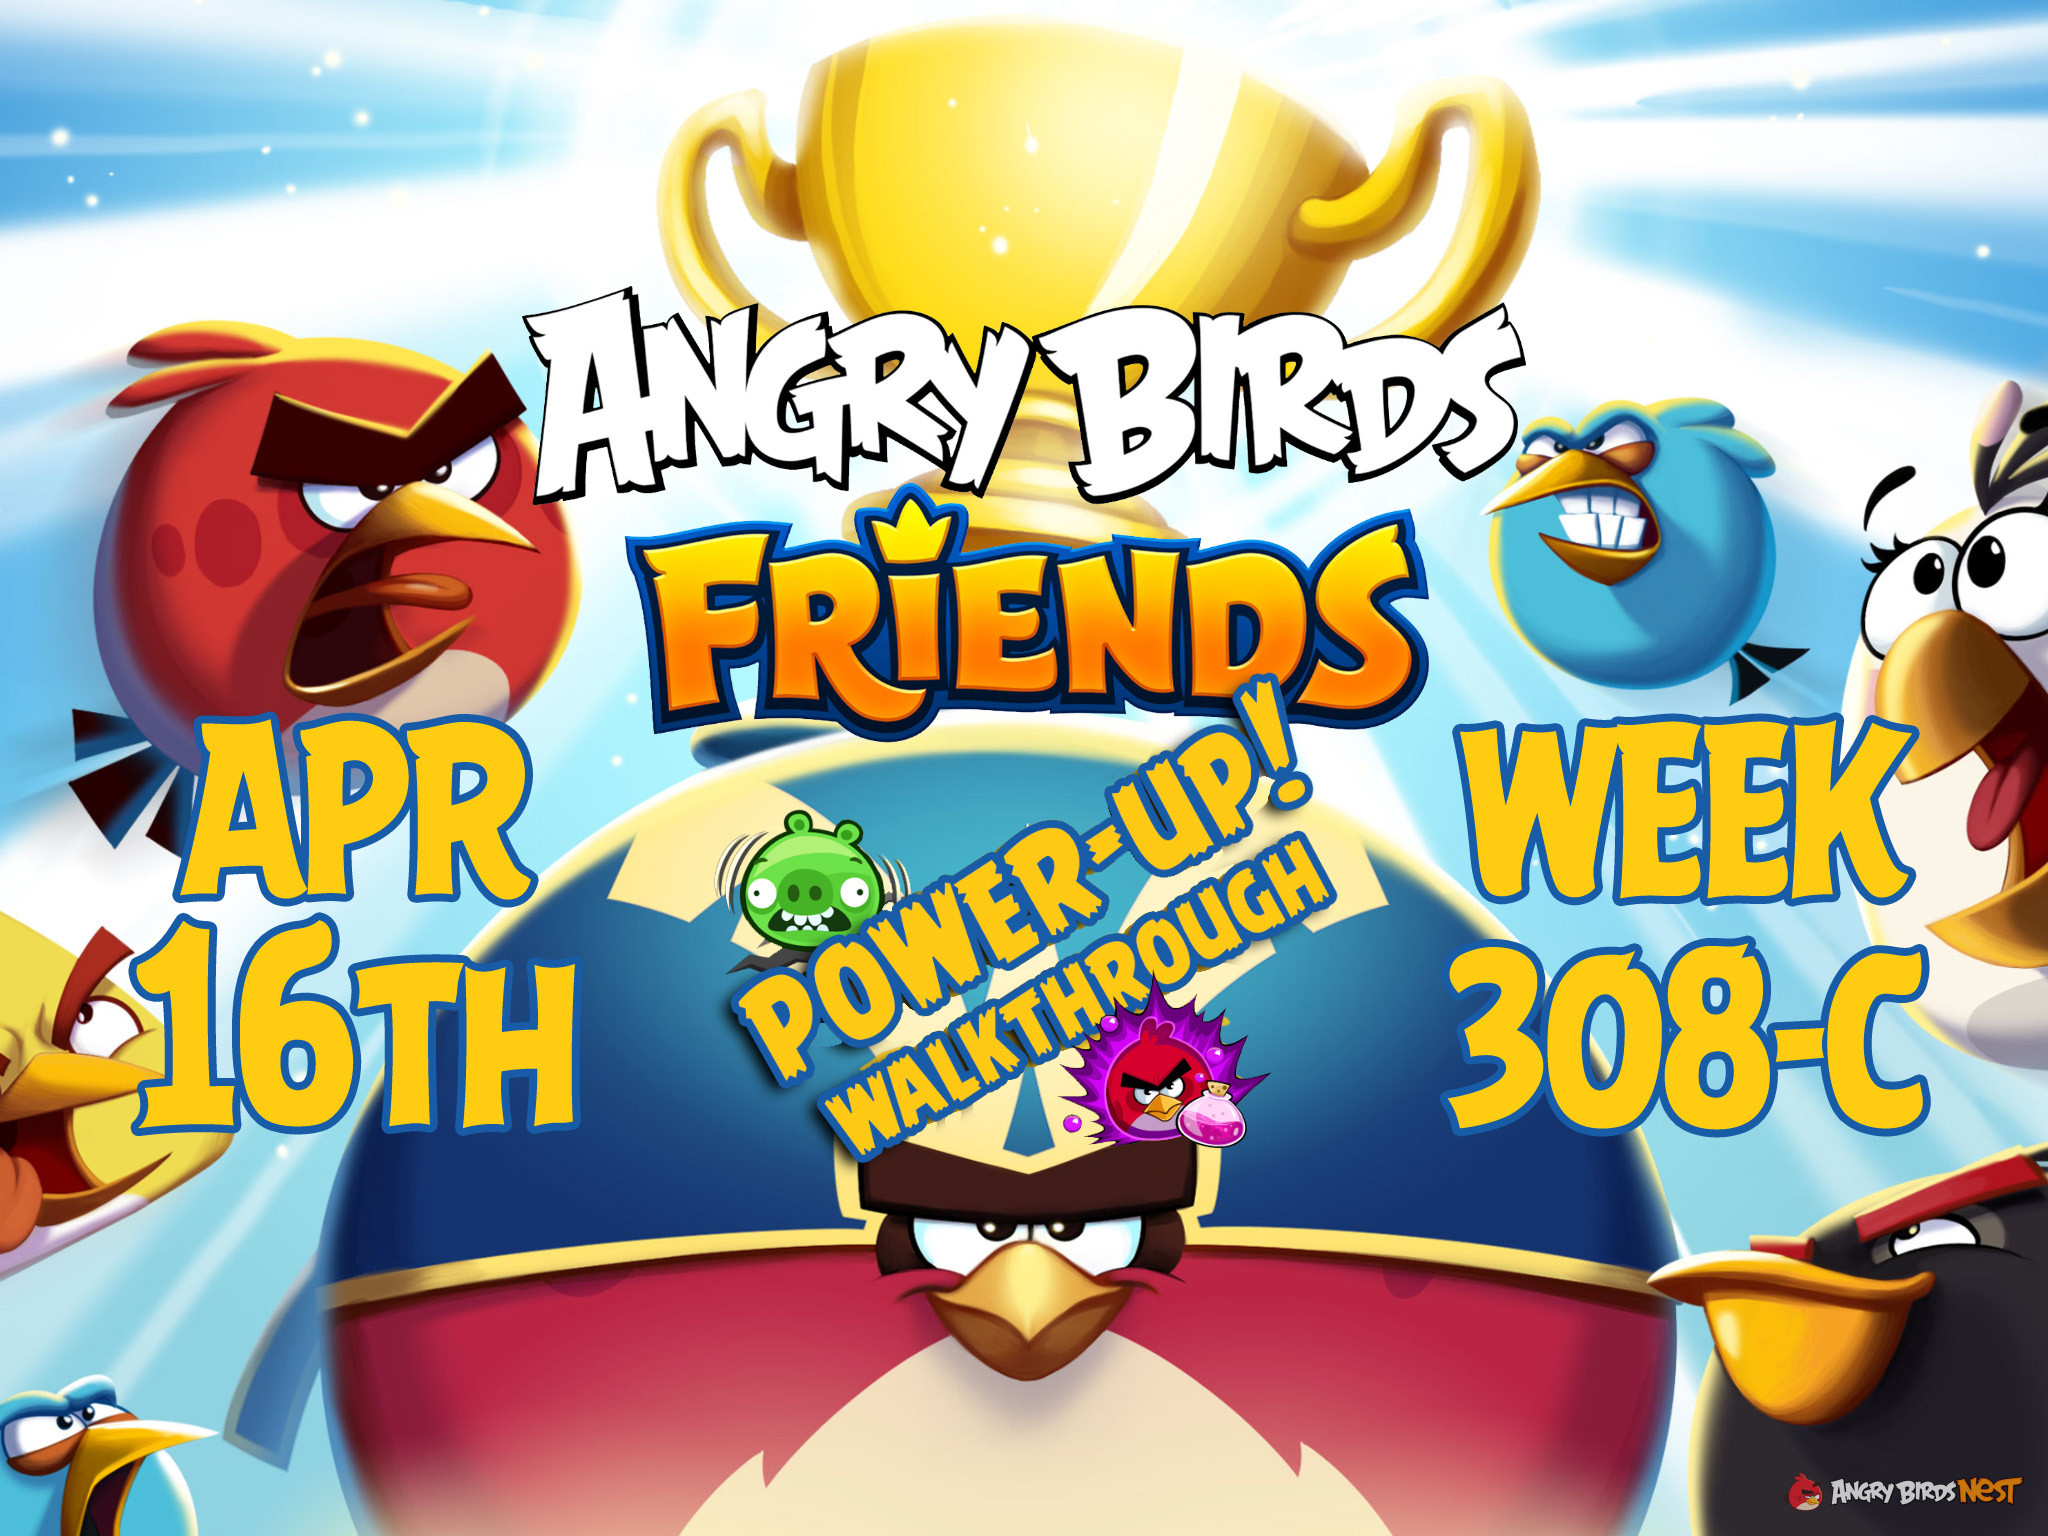 Angry Birds Friends Tournament Week 308-C Feature Image PU